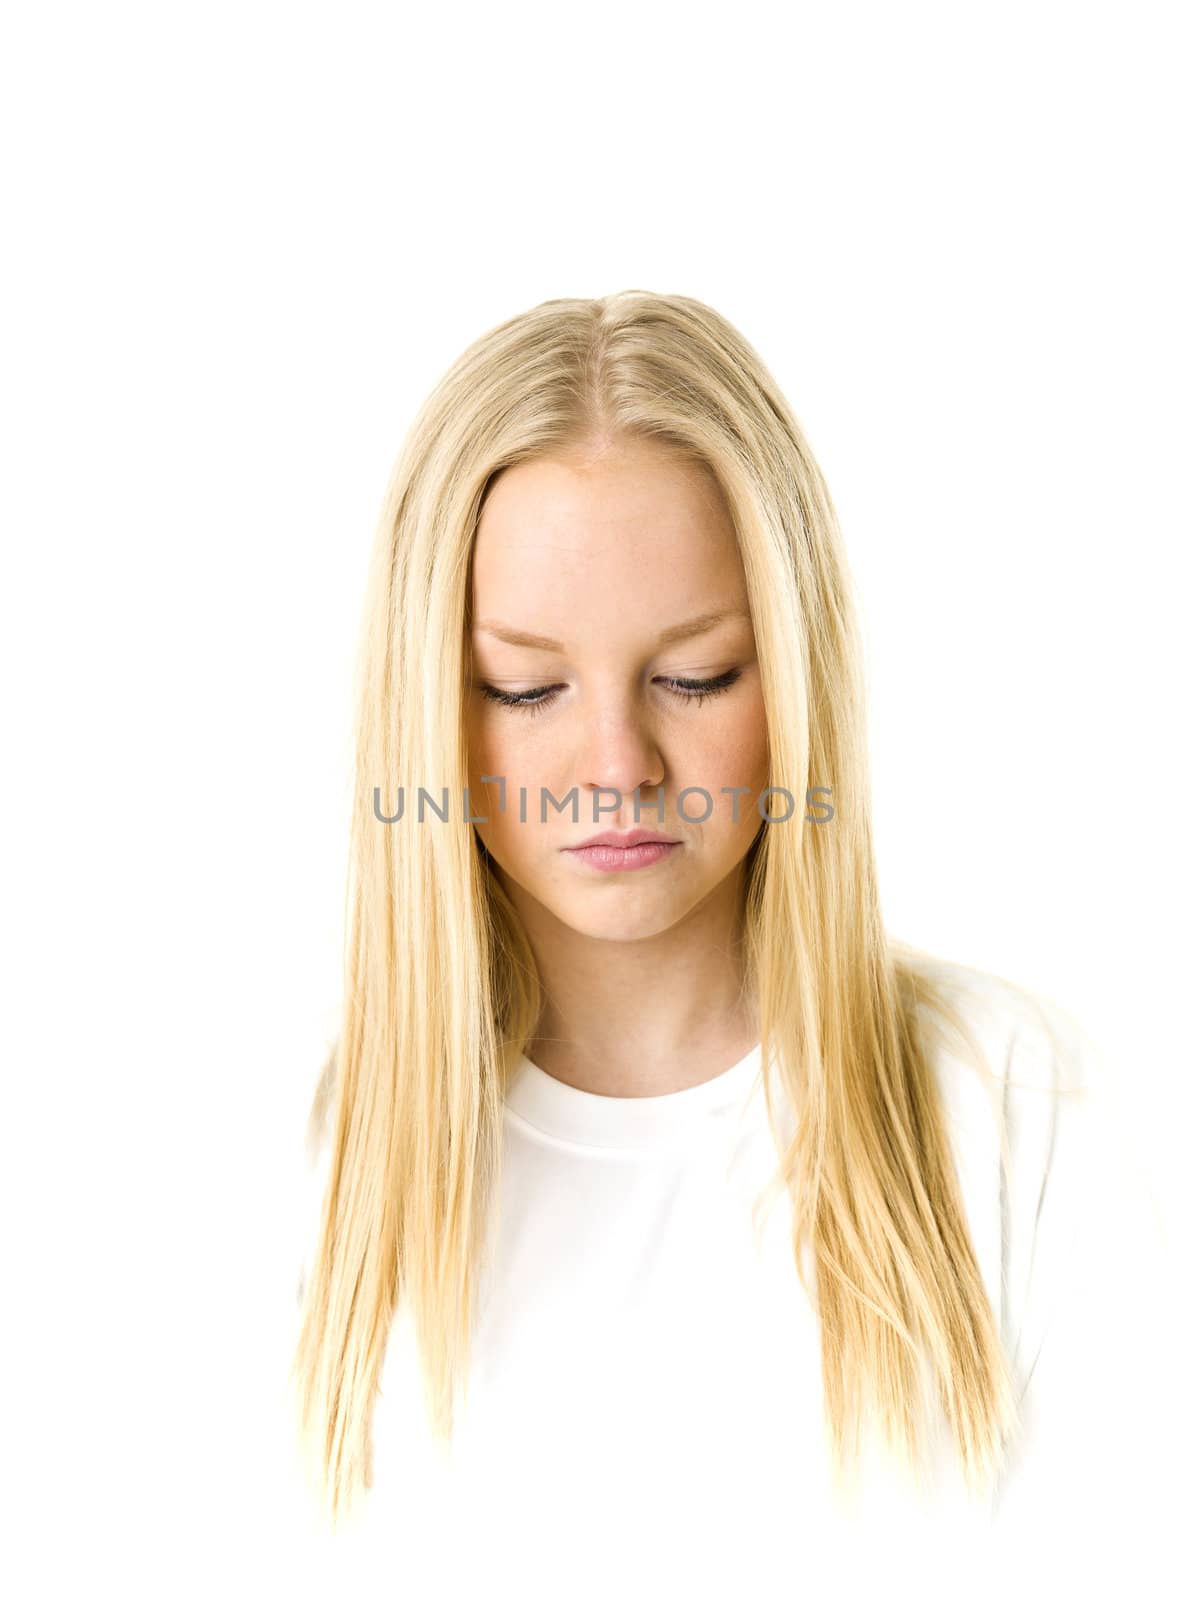 Portrait of a blond woman isolated on white background